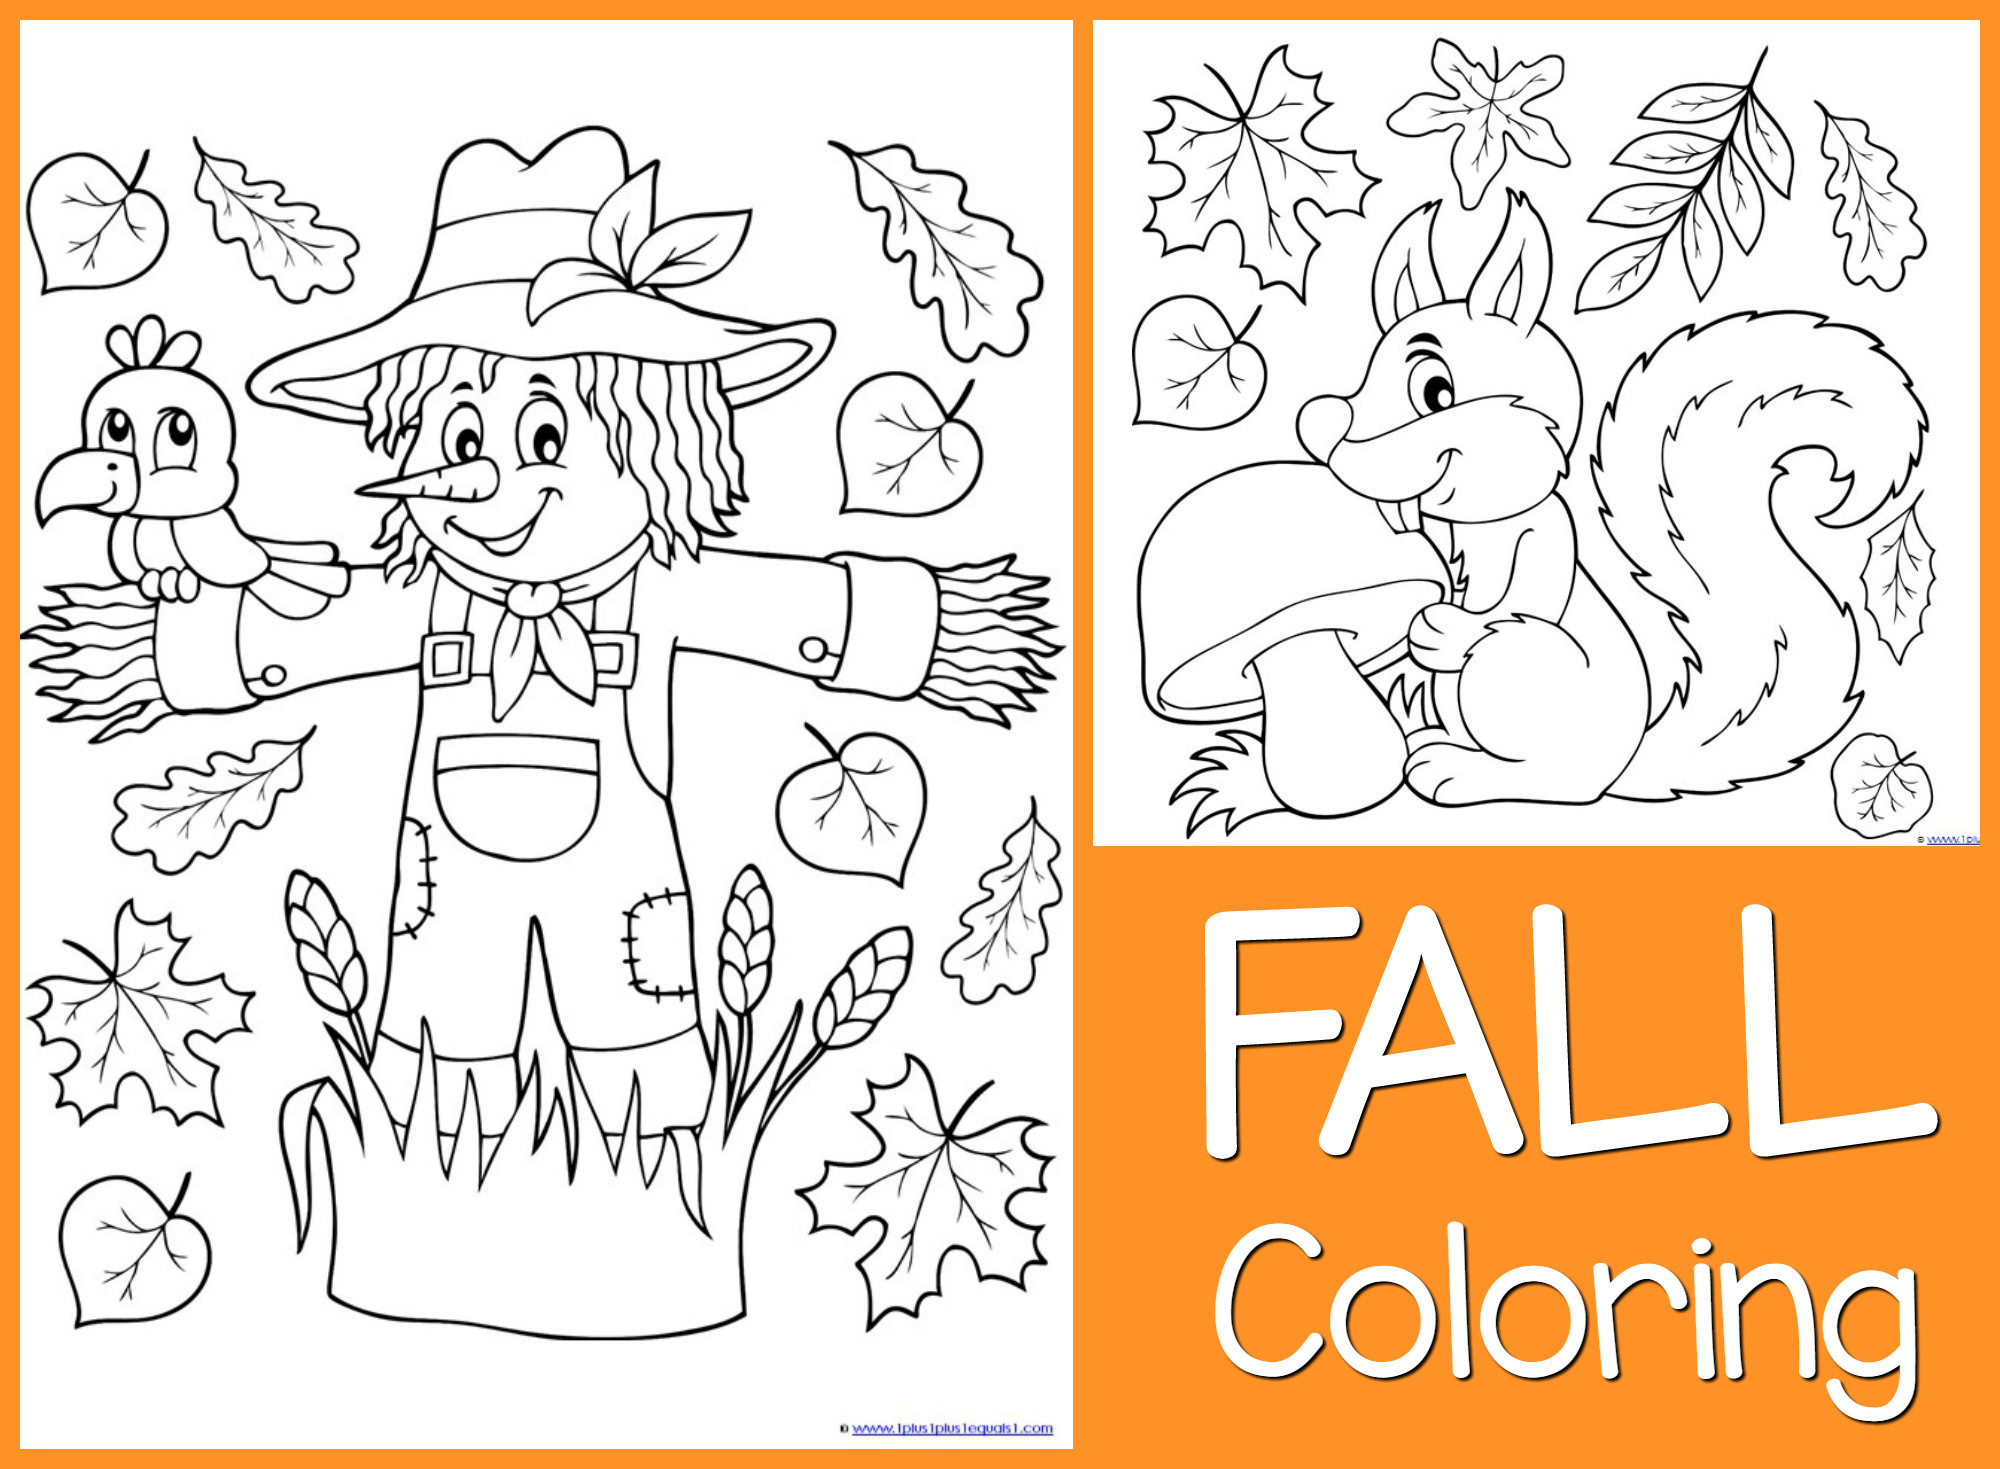 Printable Fall Coloring Pages
 Just Color Free Coloring Printables